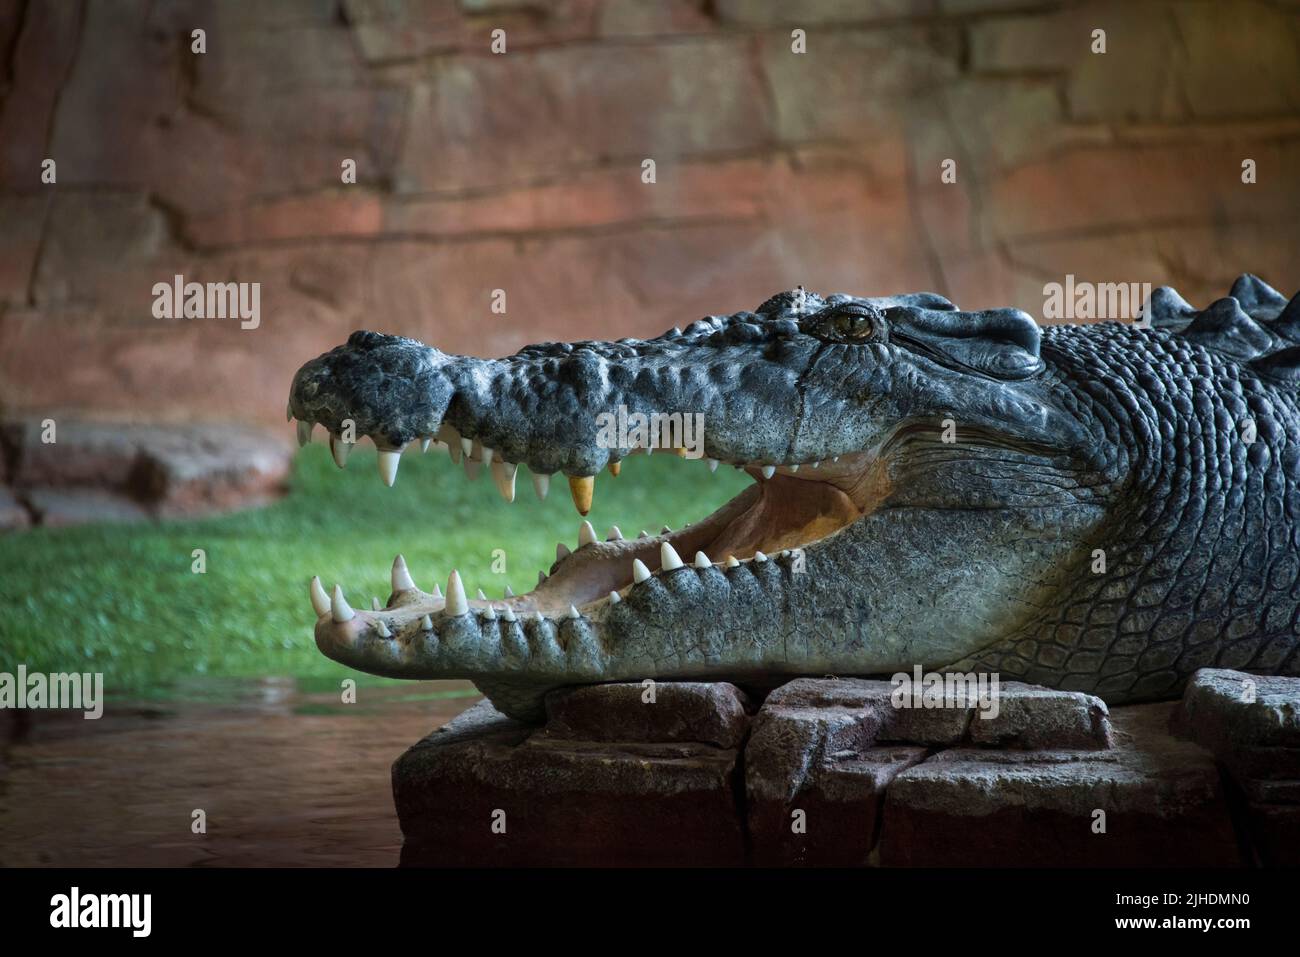 A side view of a head of an American alligator (Alligator mississippiensis) with an open jaw on stones Stock Photo